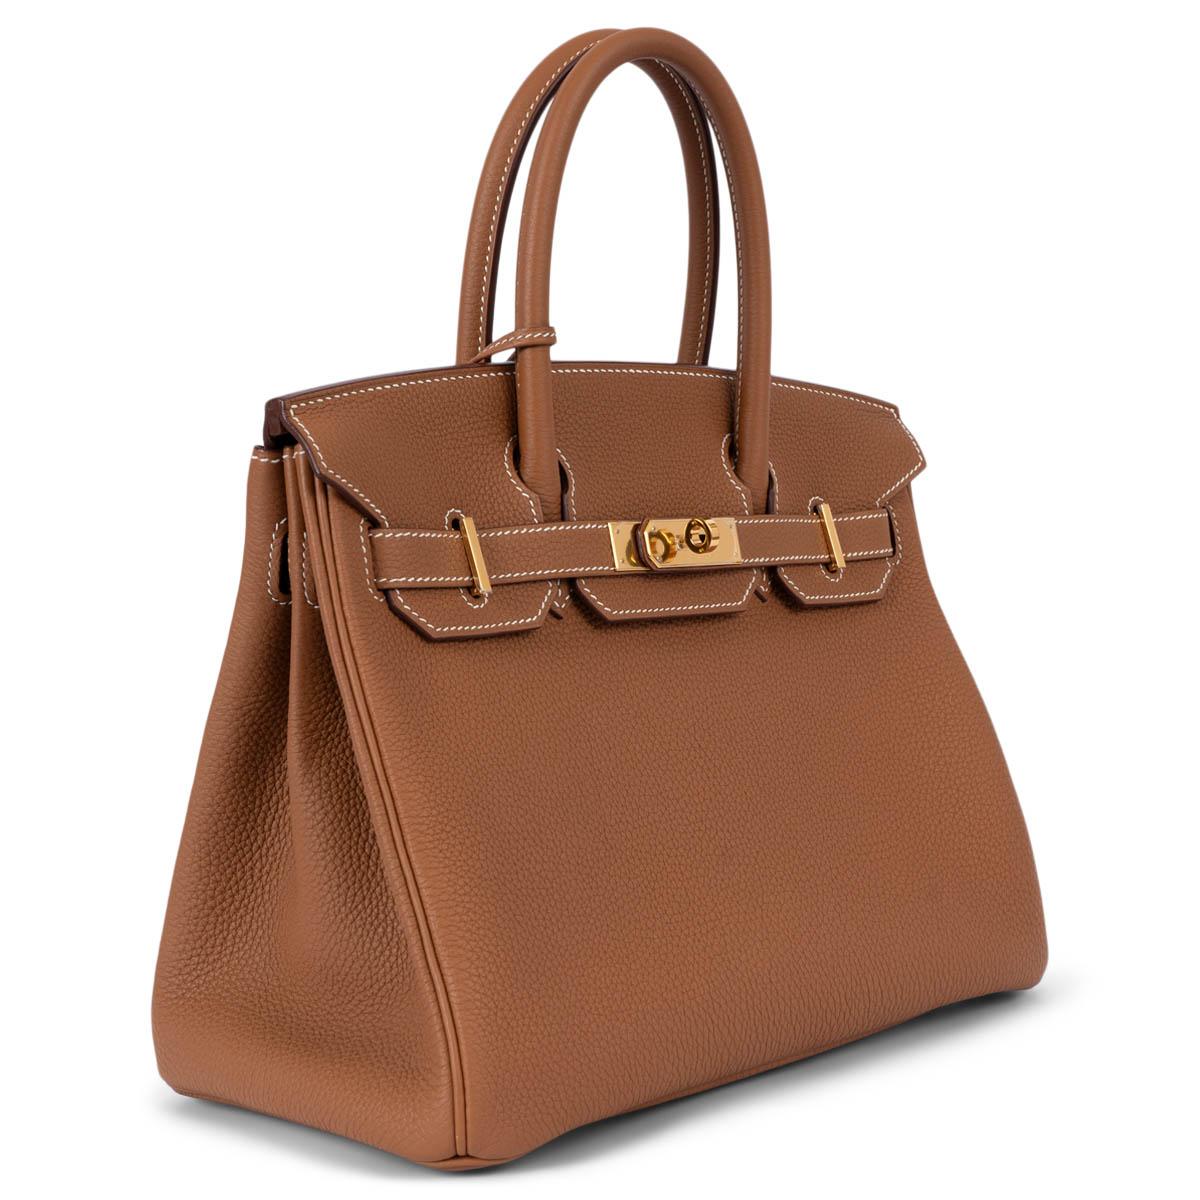 100% authentic Hermès Birkin 30 bag in Gold camel Veau Togo leather with gold-plated hardware. Lined in Chevre (goat skin) with an open pocket against the front and a zipper pocket against the back. Brand new - comes with full